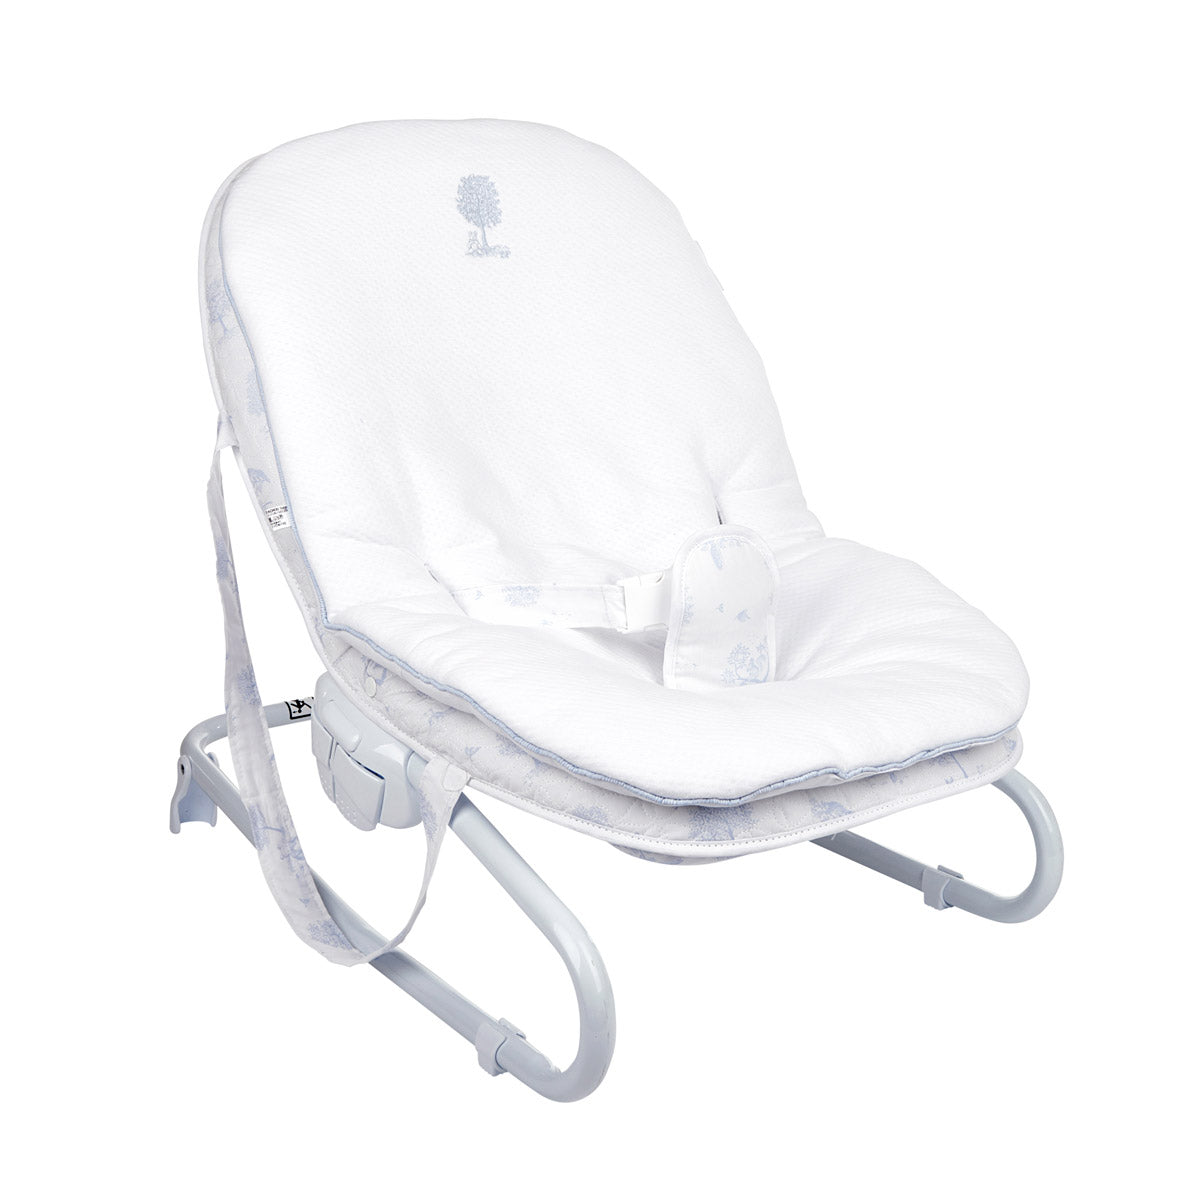 Theophile & Patachou Baby Seat Cover - Sweet Blue / White